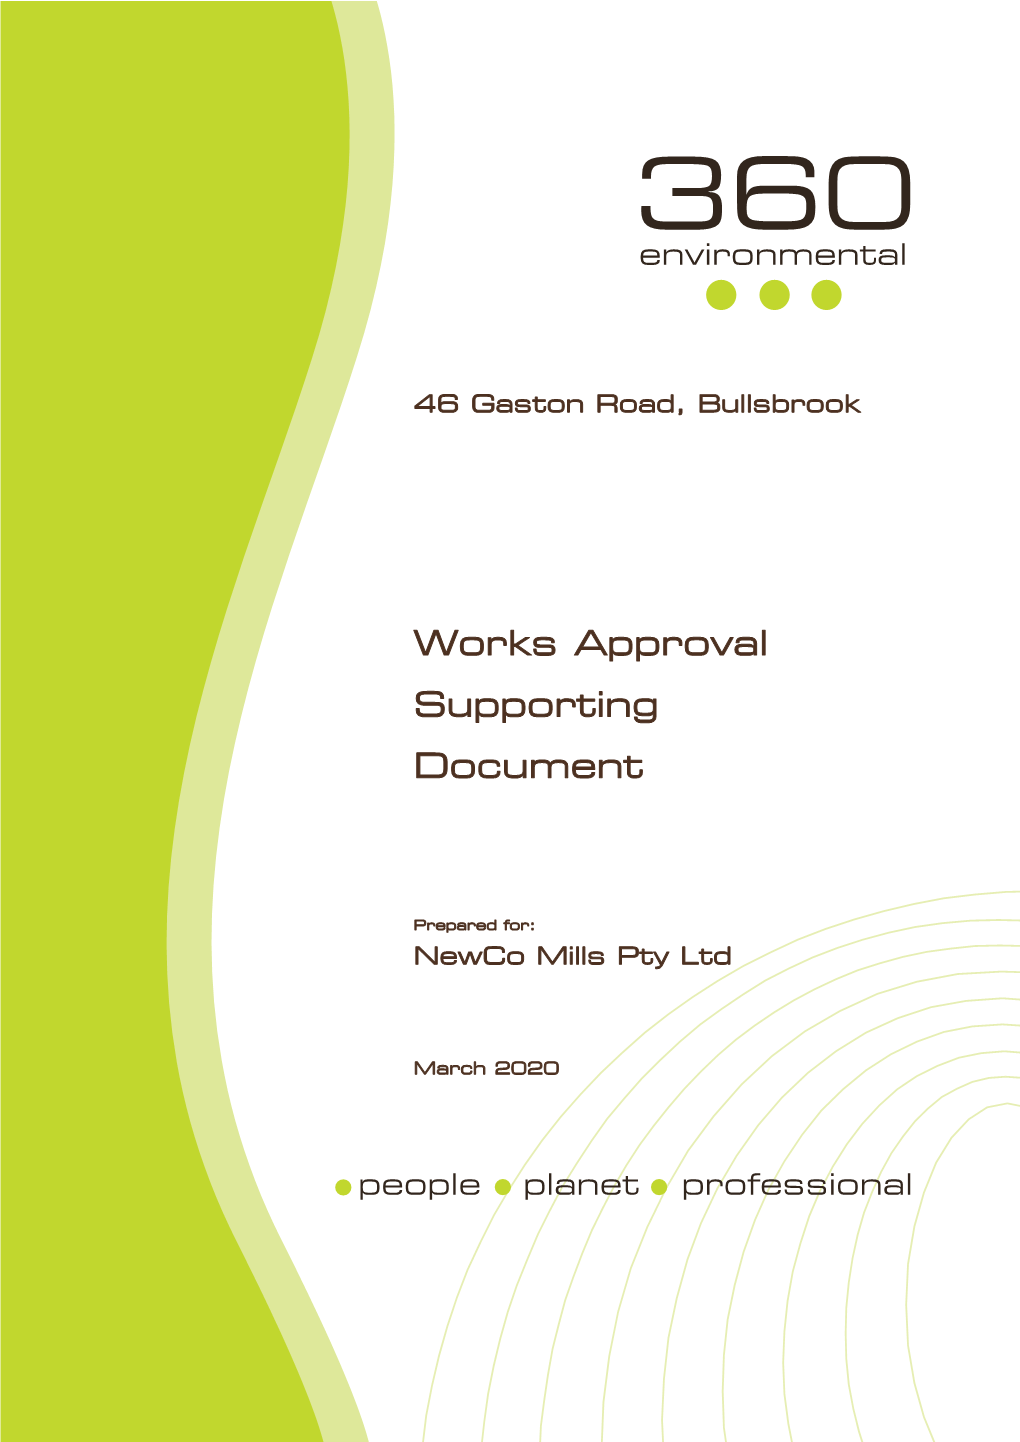 Works Approval Supporting Document